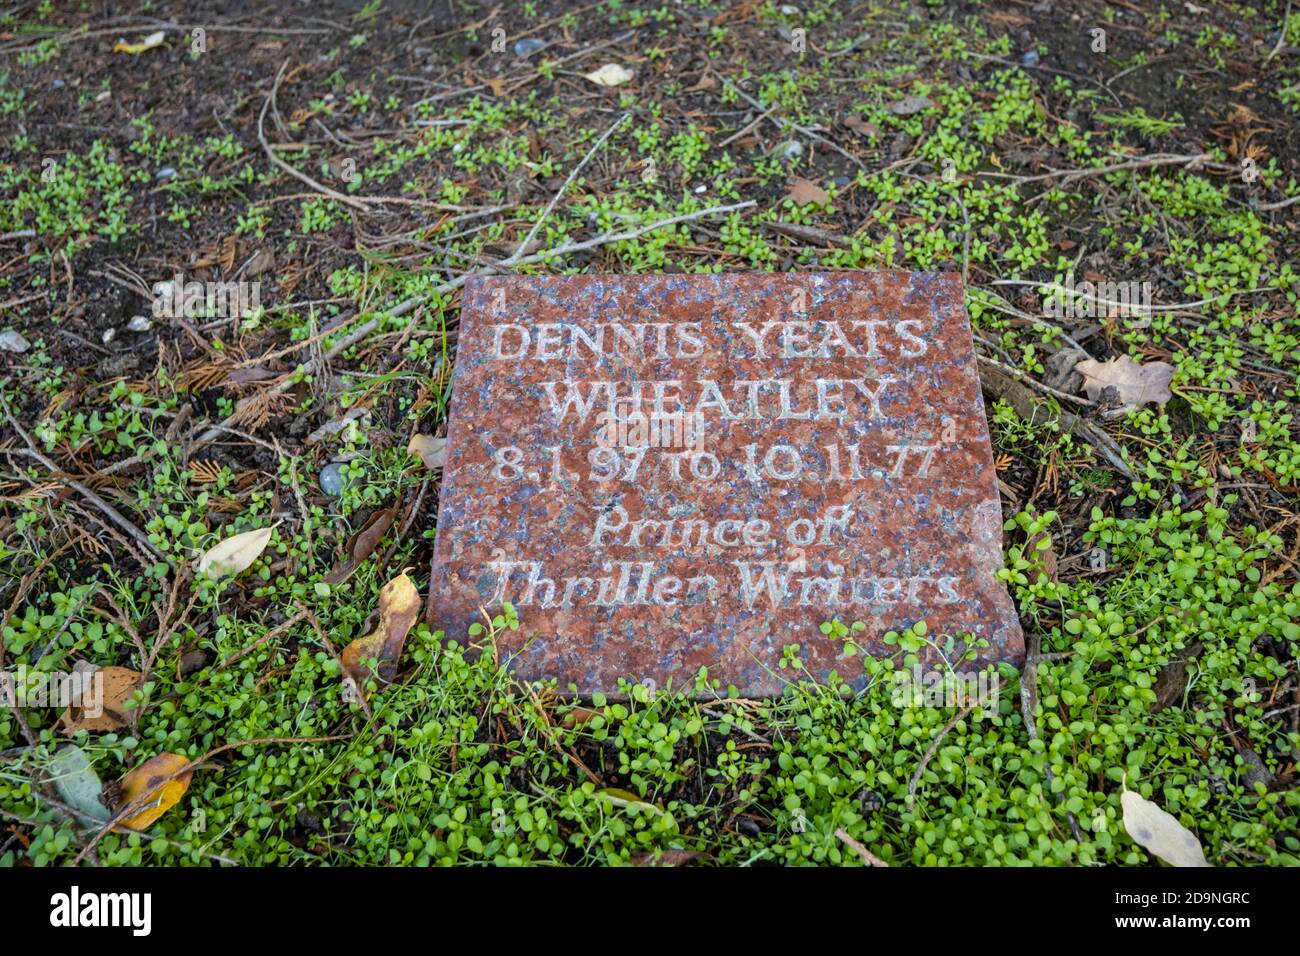 Memorial to thriller writer novelist Dennis Wheatley in South Cemetery, Brookwood Cemetery Glades of Remembrance, Woking, Surrey, south-east England Stock Photo